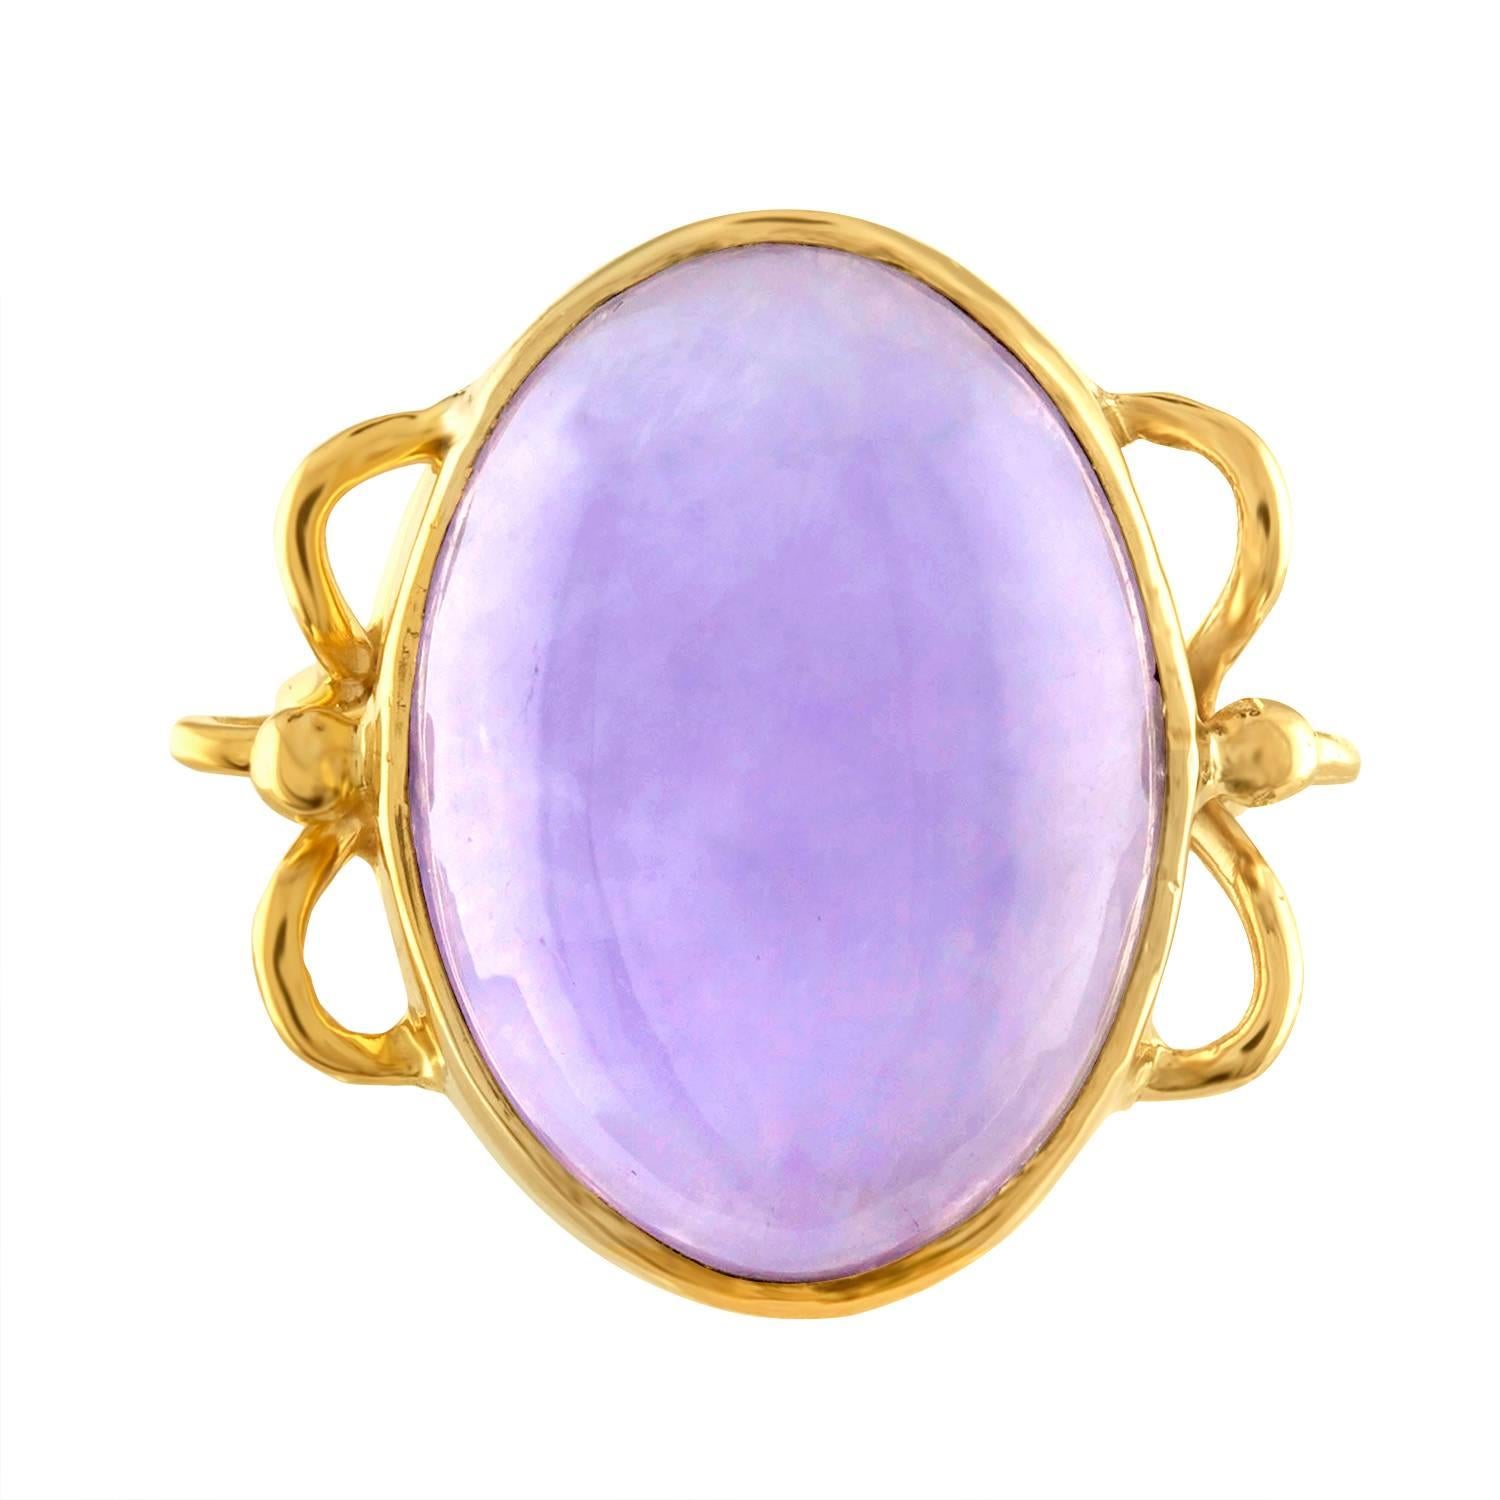 Beautiful & Natural Jade
The ring is 14K Yellow Gold
The Oval Cabochon is Natural Lavender Jade
The top of the ring measures 0.75